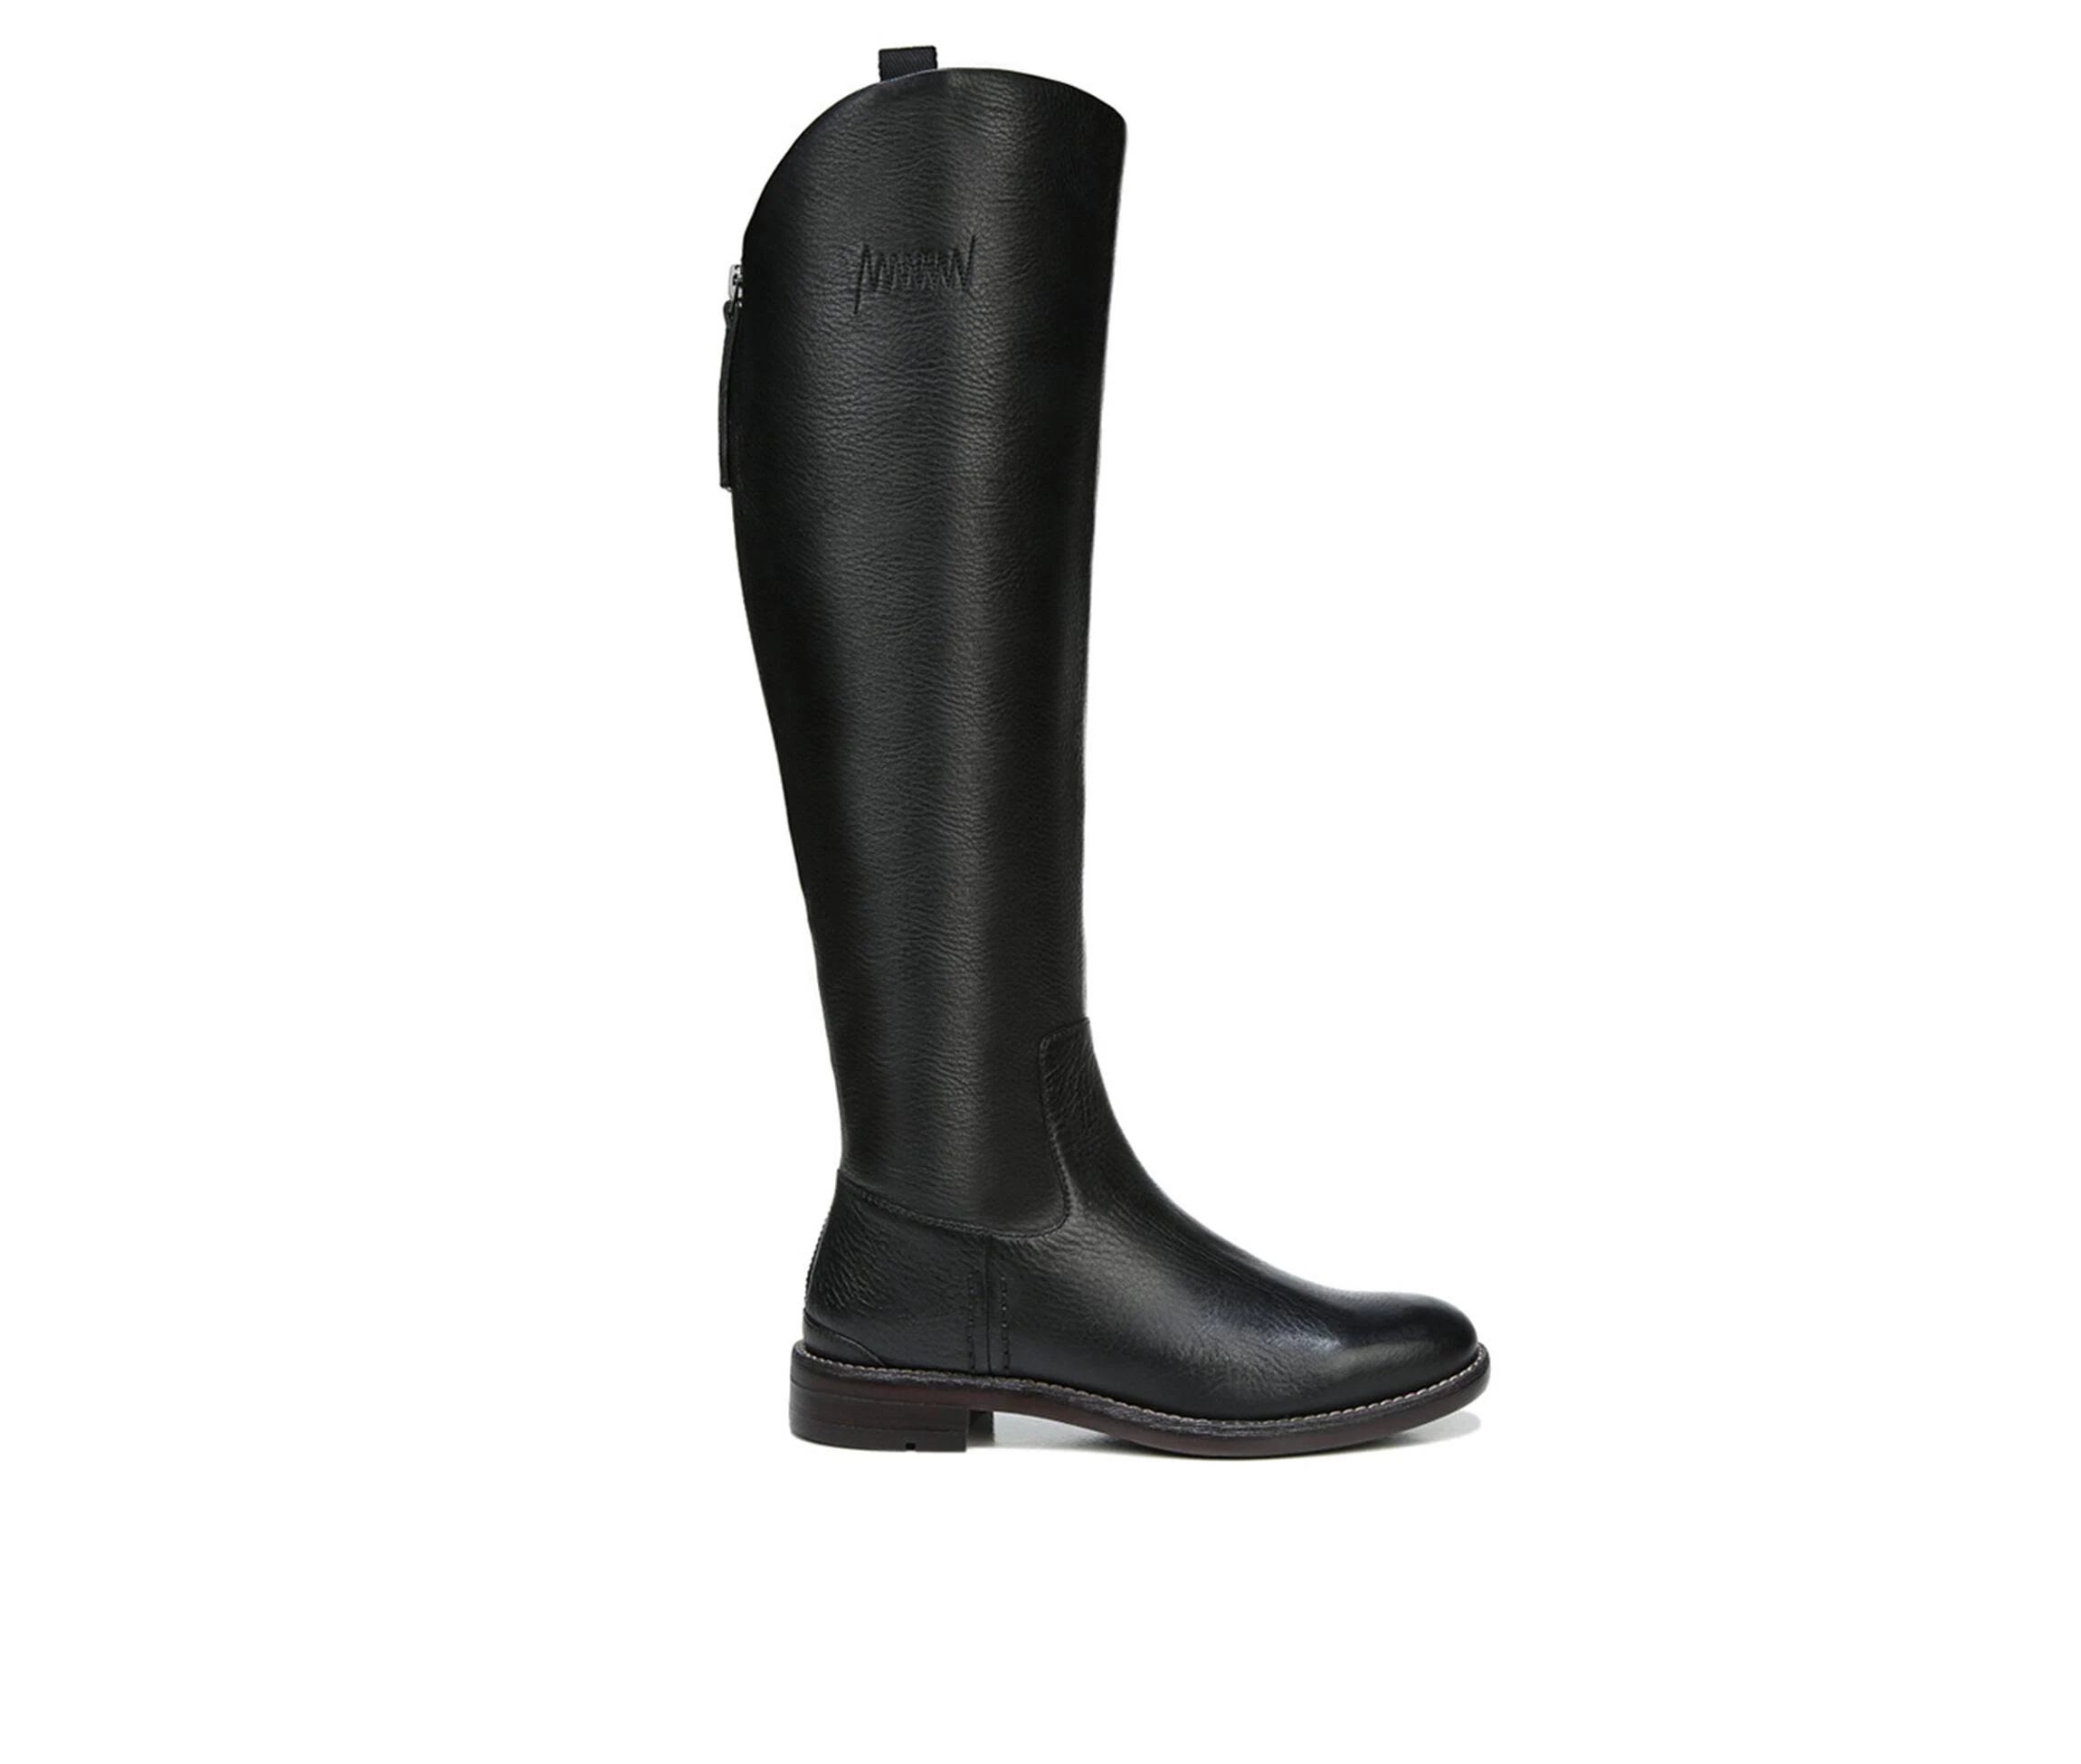 Elegant Knee-High Leather Boots with Almond Toe | Image